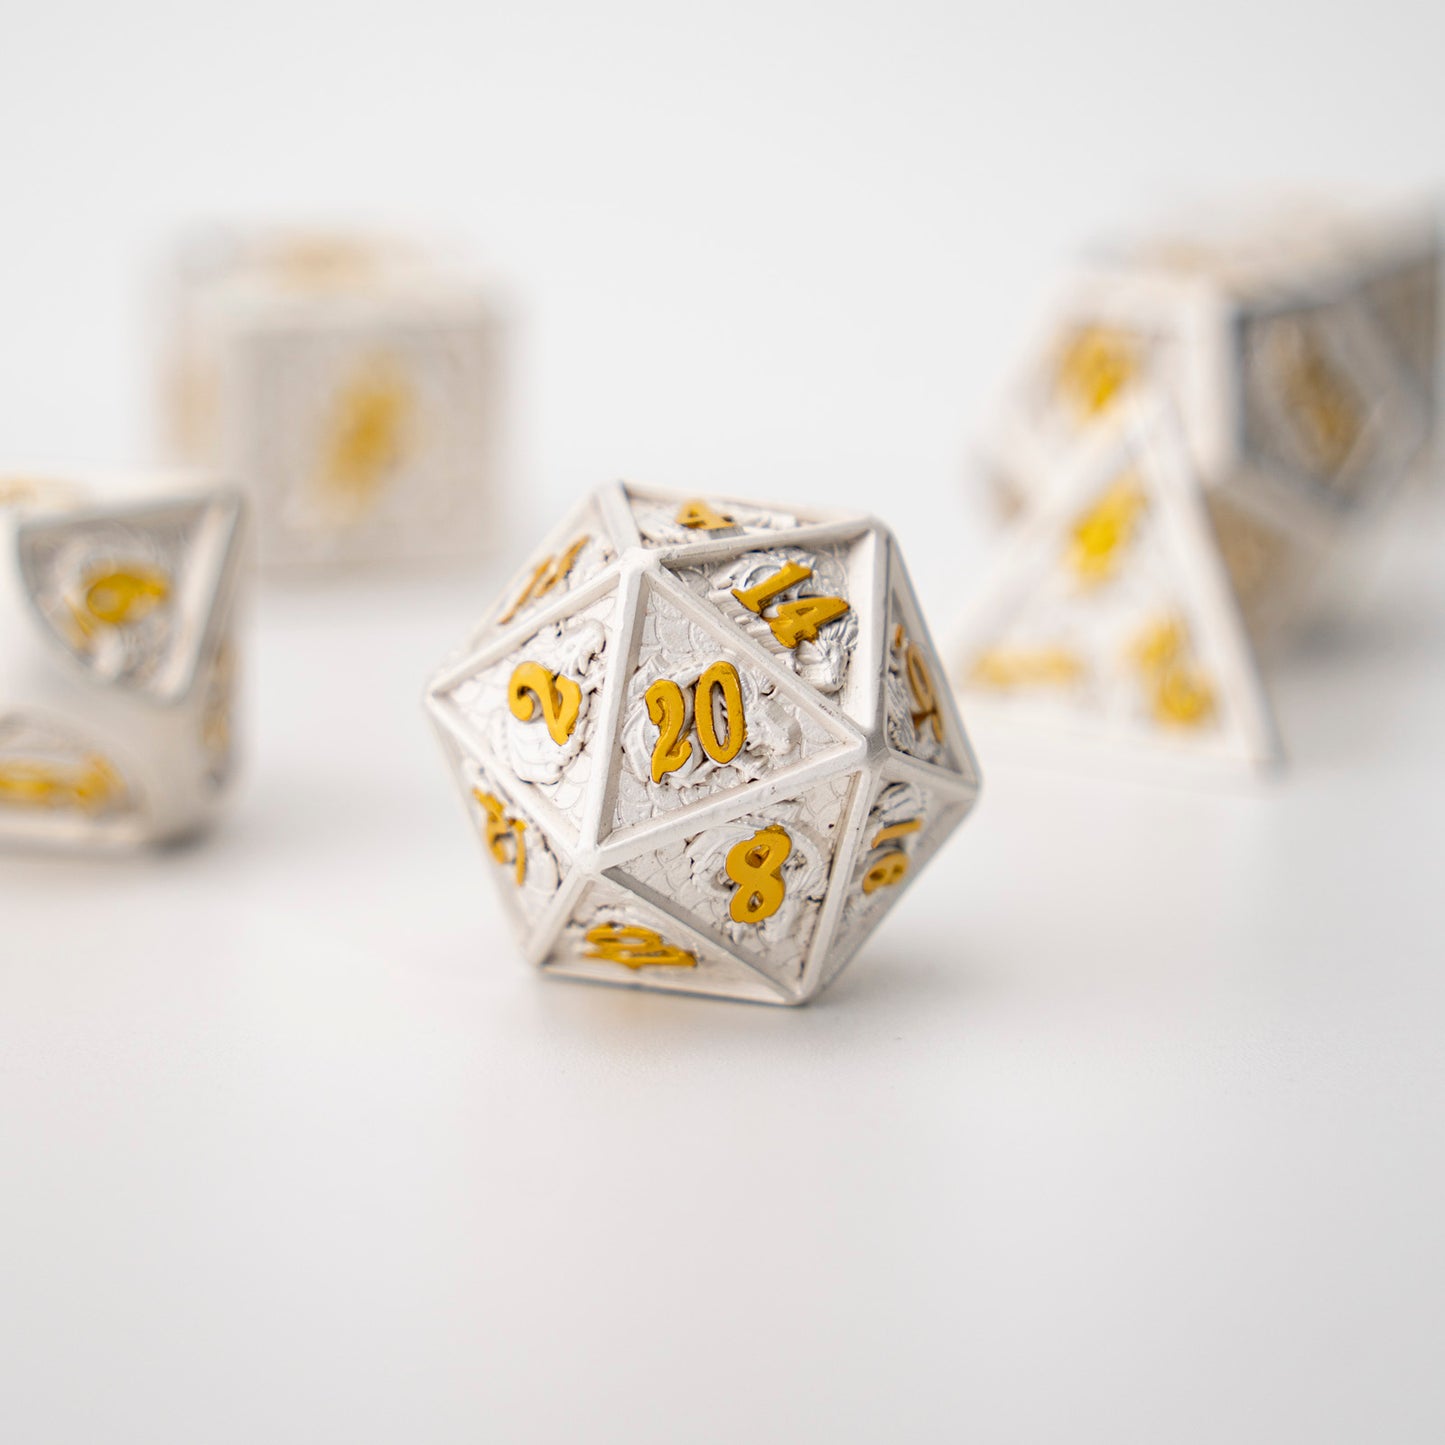 Pearl White with gold number dragon metal dice set - HYMGHO Dice 